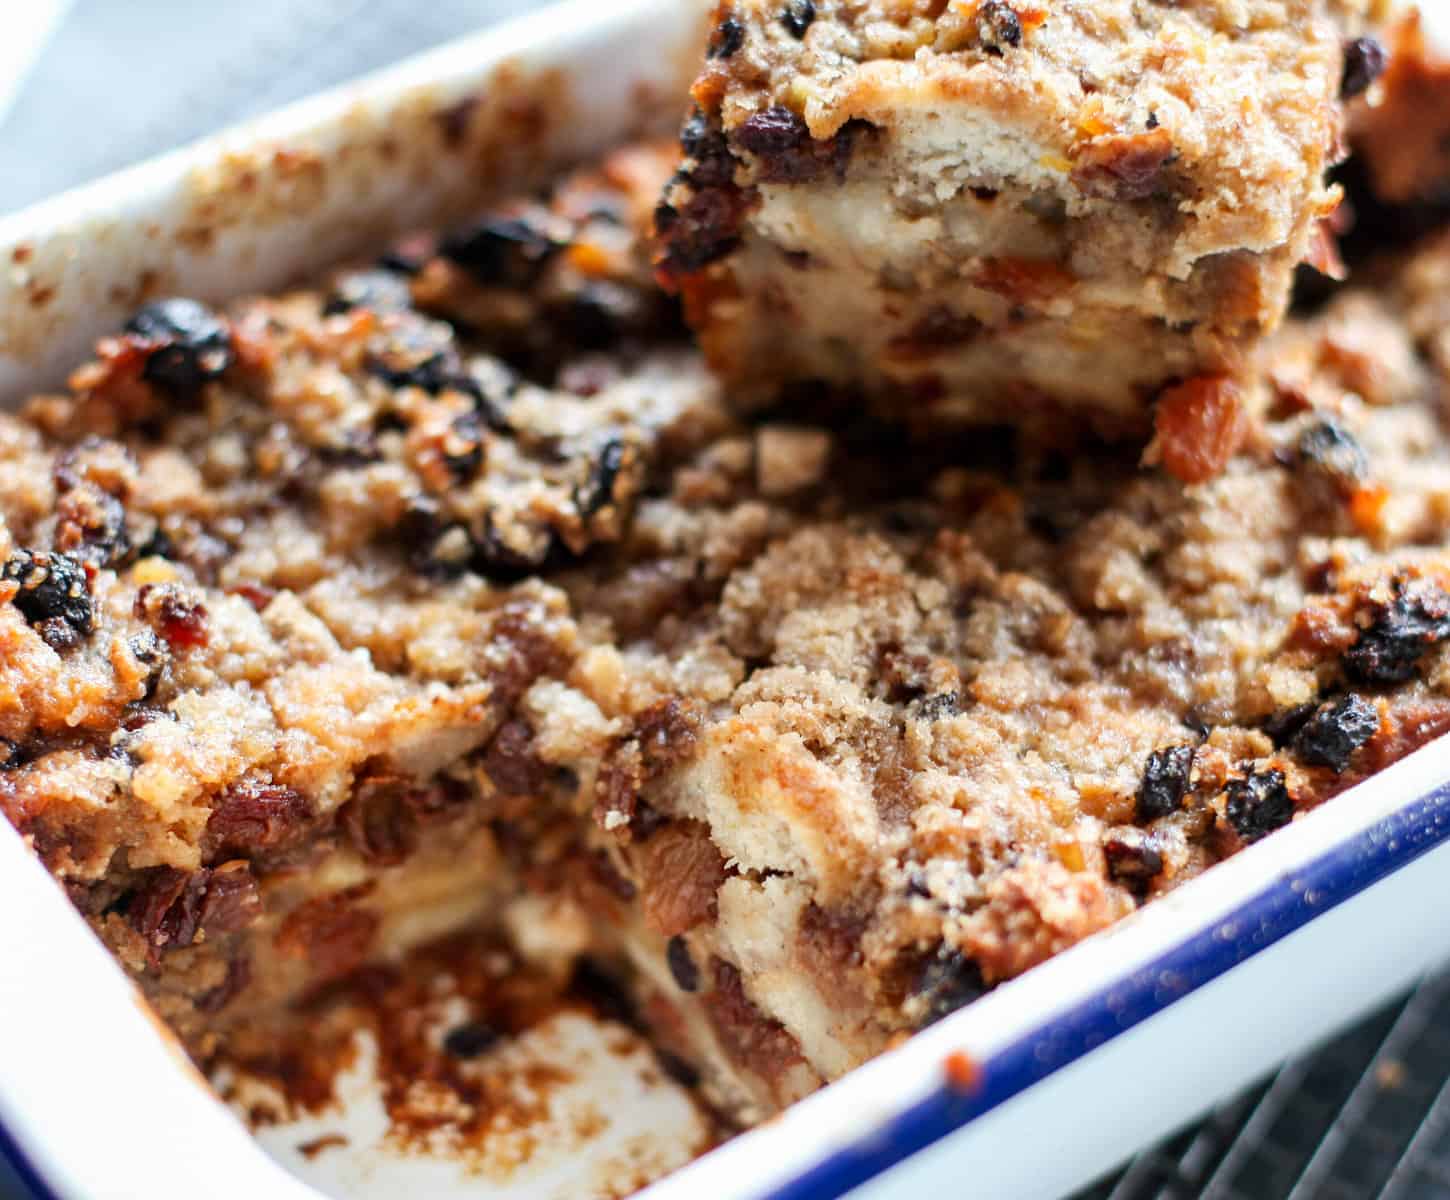 Baked bread pudding in a dish.